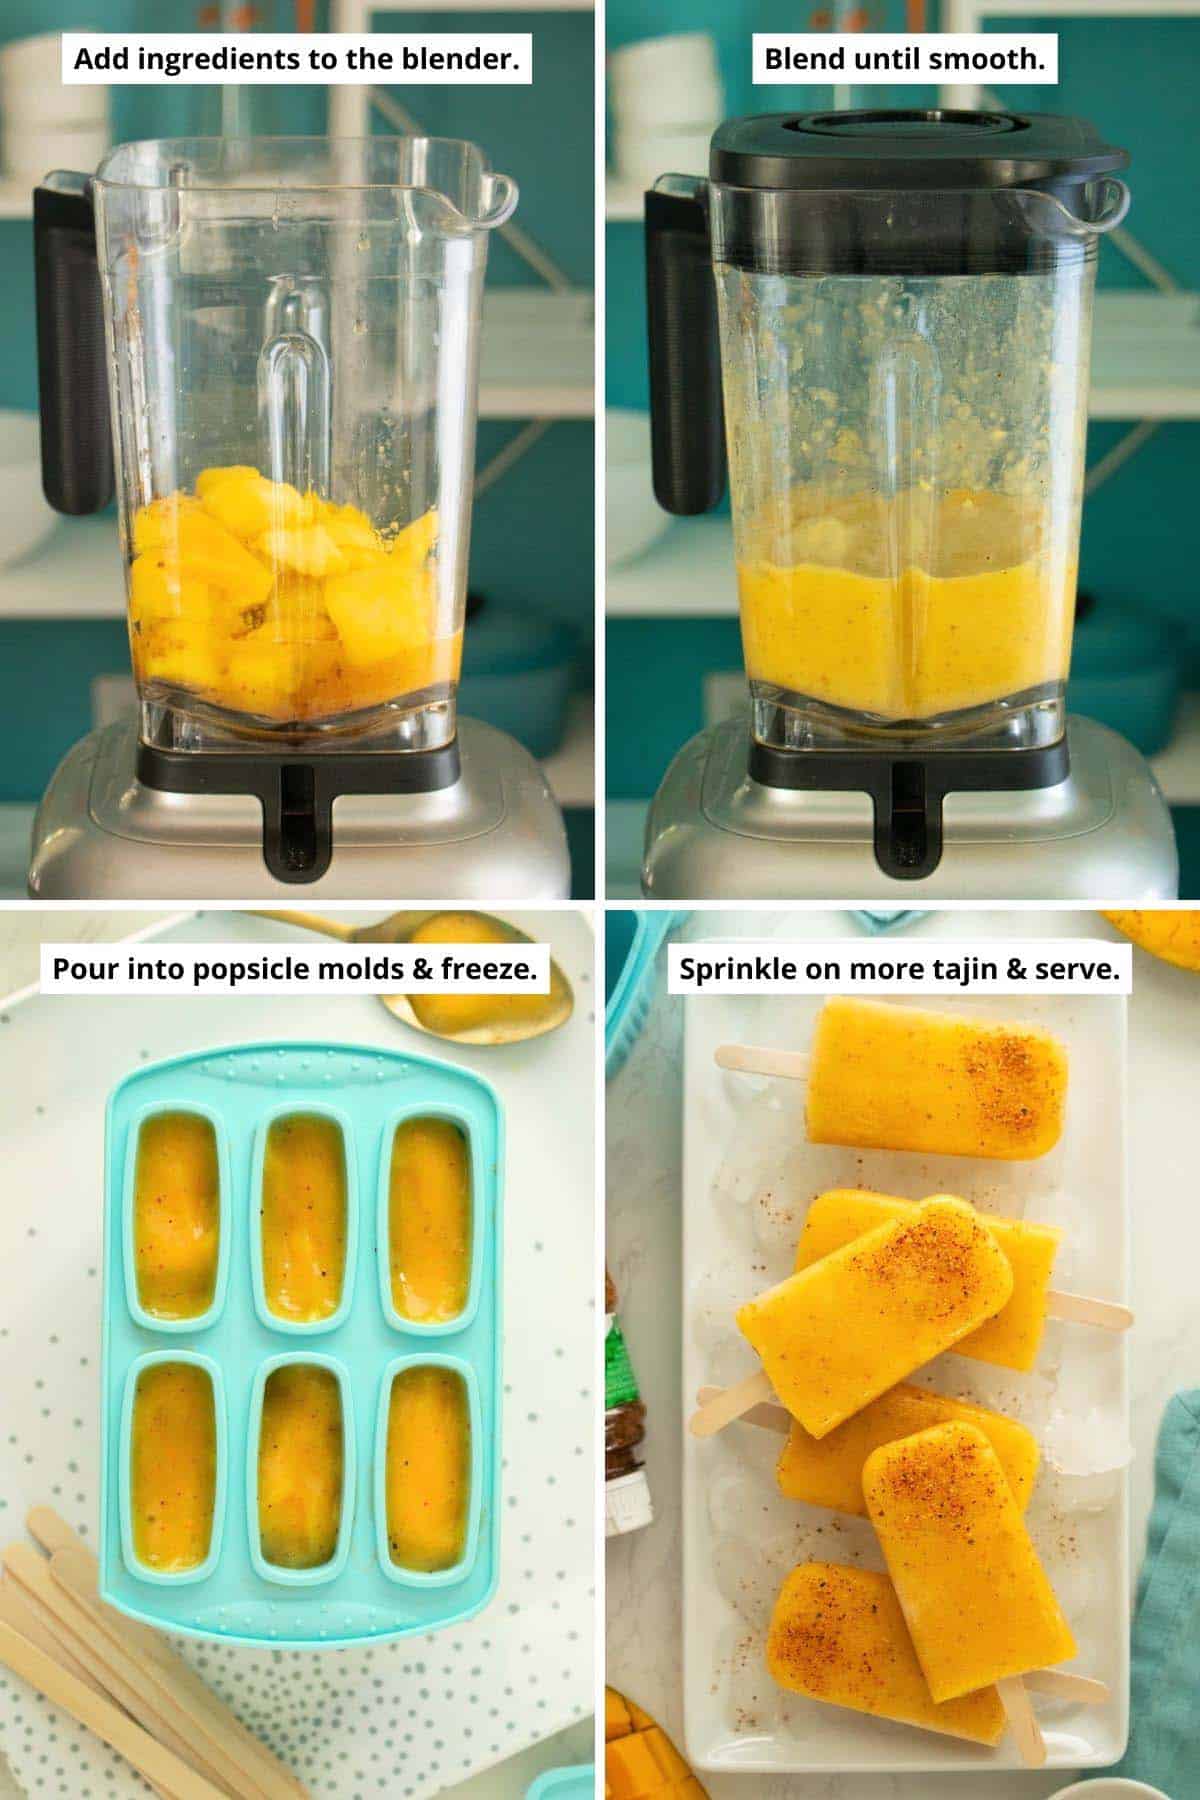 image collage showing popsicle ingredients in the blender before and after blending, then poured into popsicle molds, and the finished mango popsicles on a tray of ice